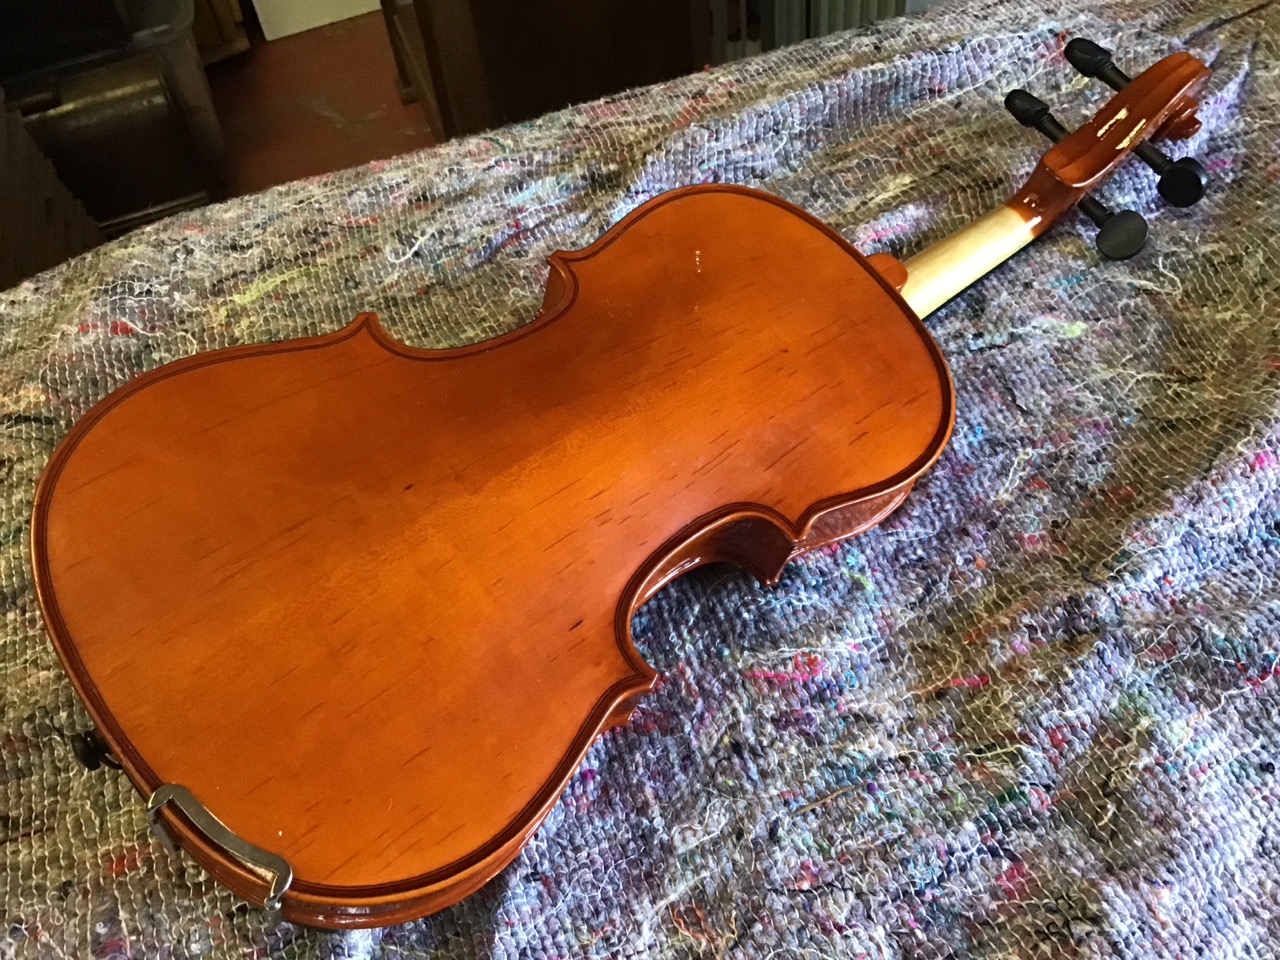 A cased Yamada violin with bow, and a spare set of strings - looks unplayed? (21.75in) - Image 3 of 3